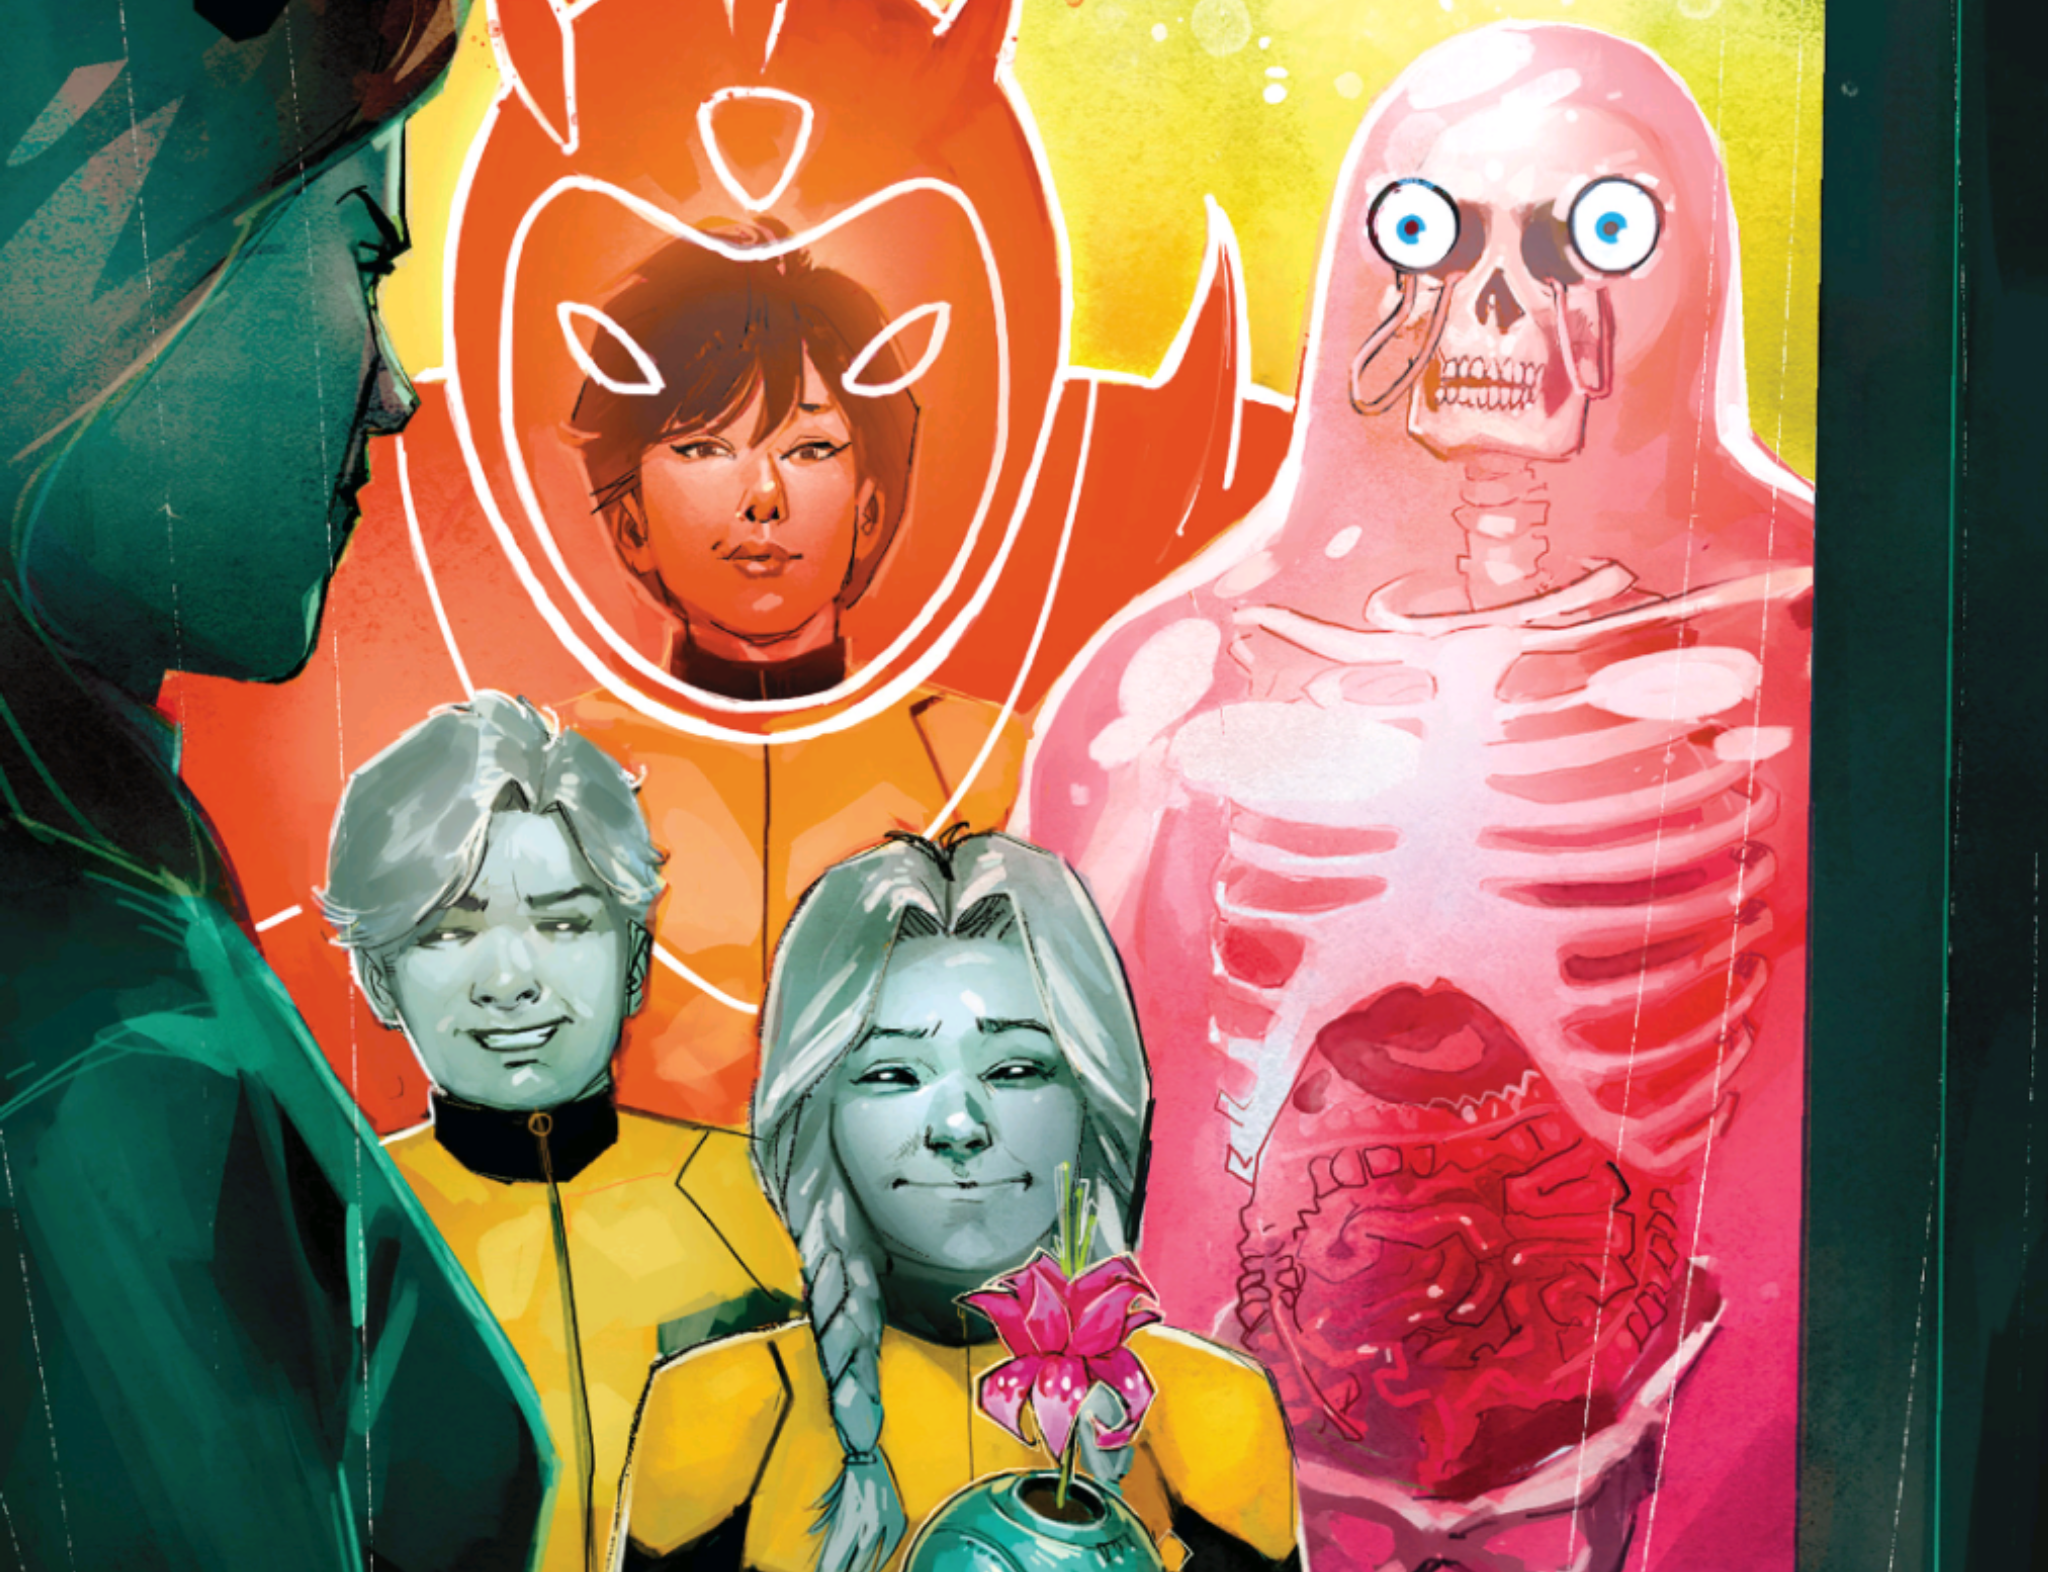 New Mutants by Ed Brisson, Flaviano, and Marco Failla — House of X